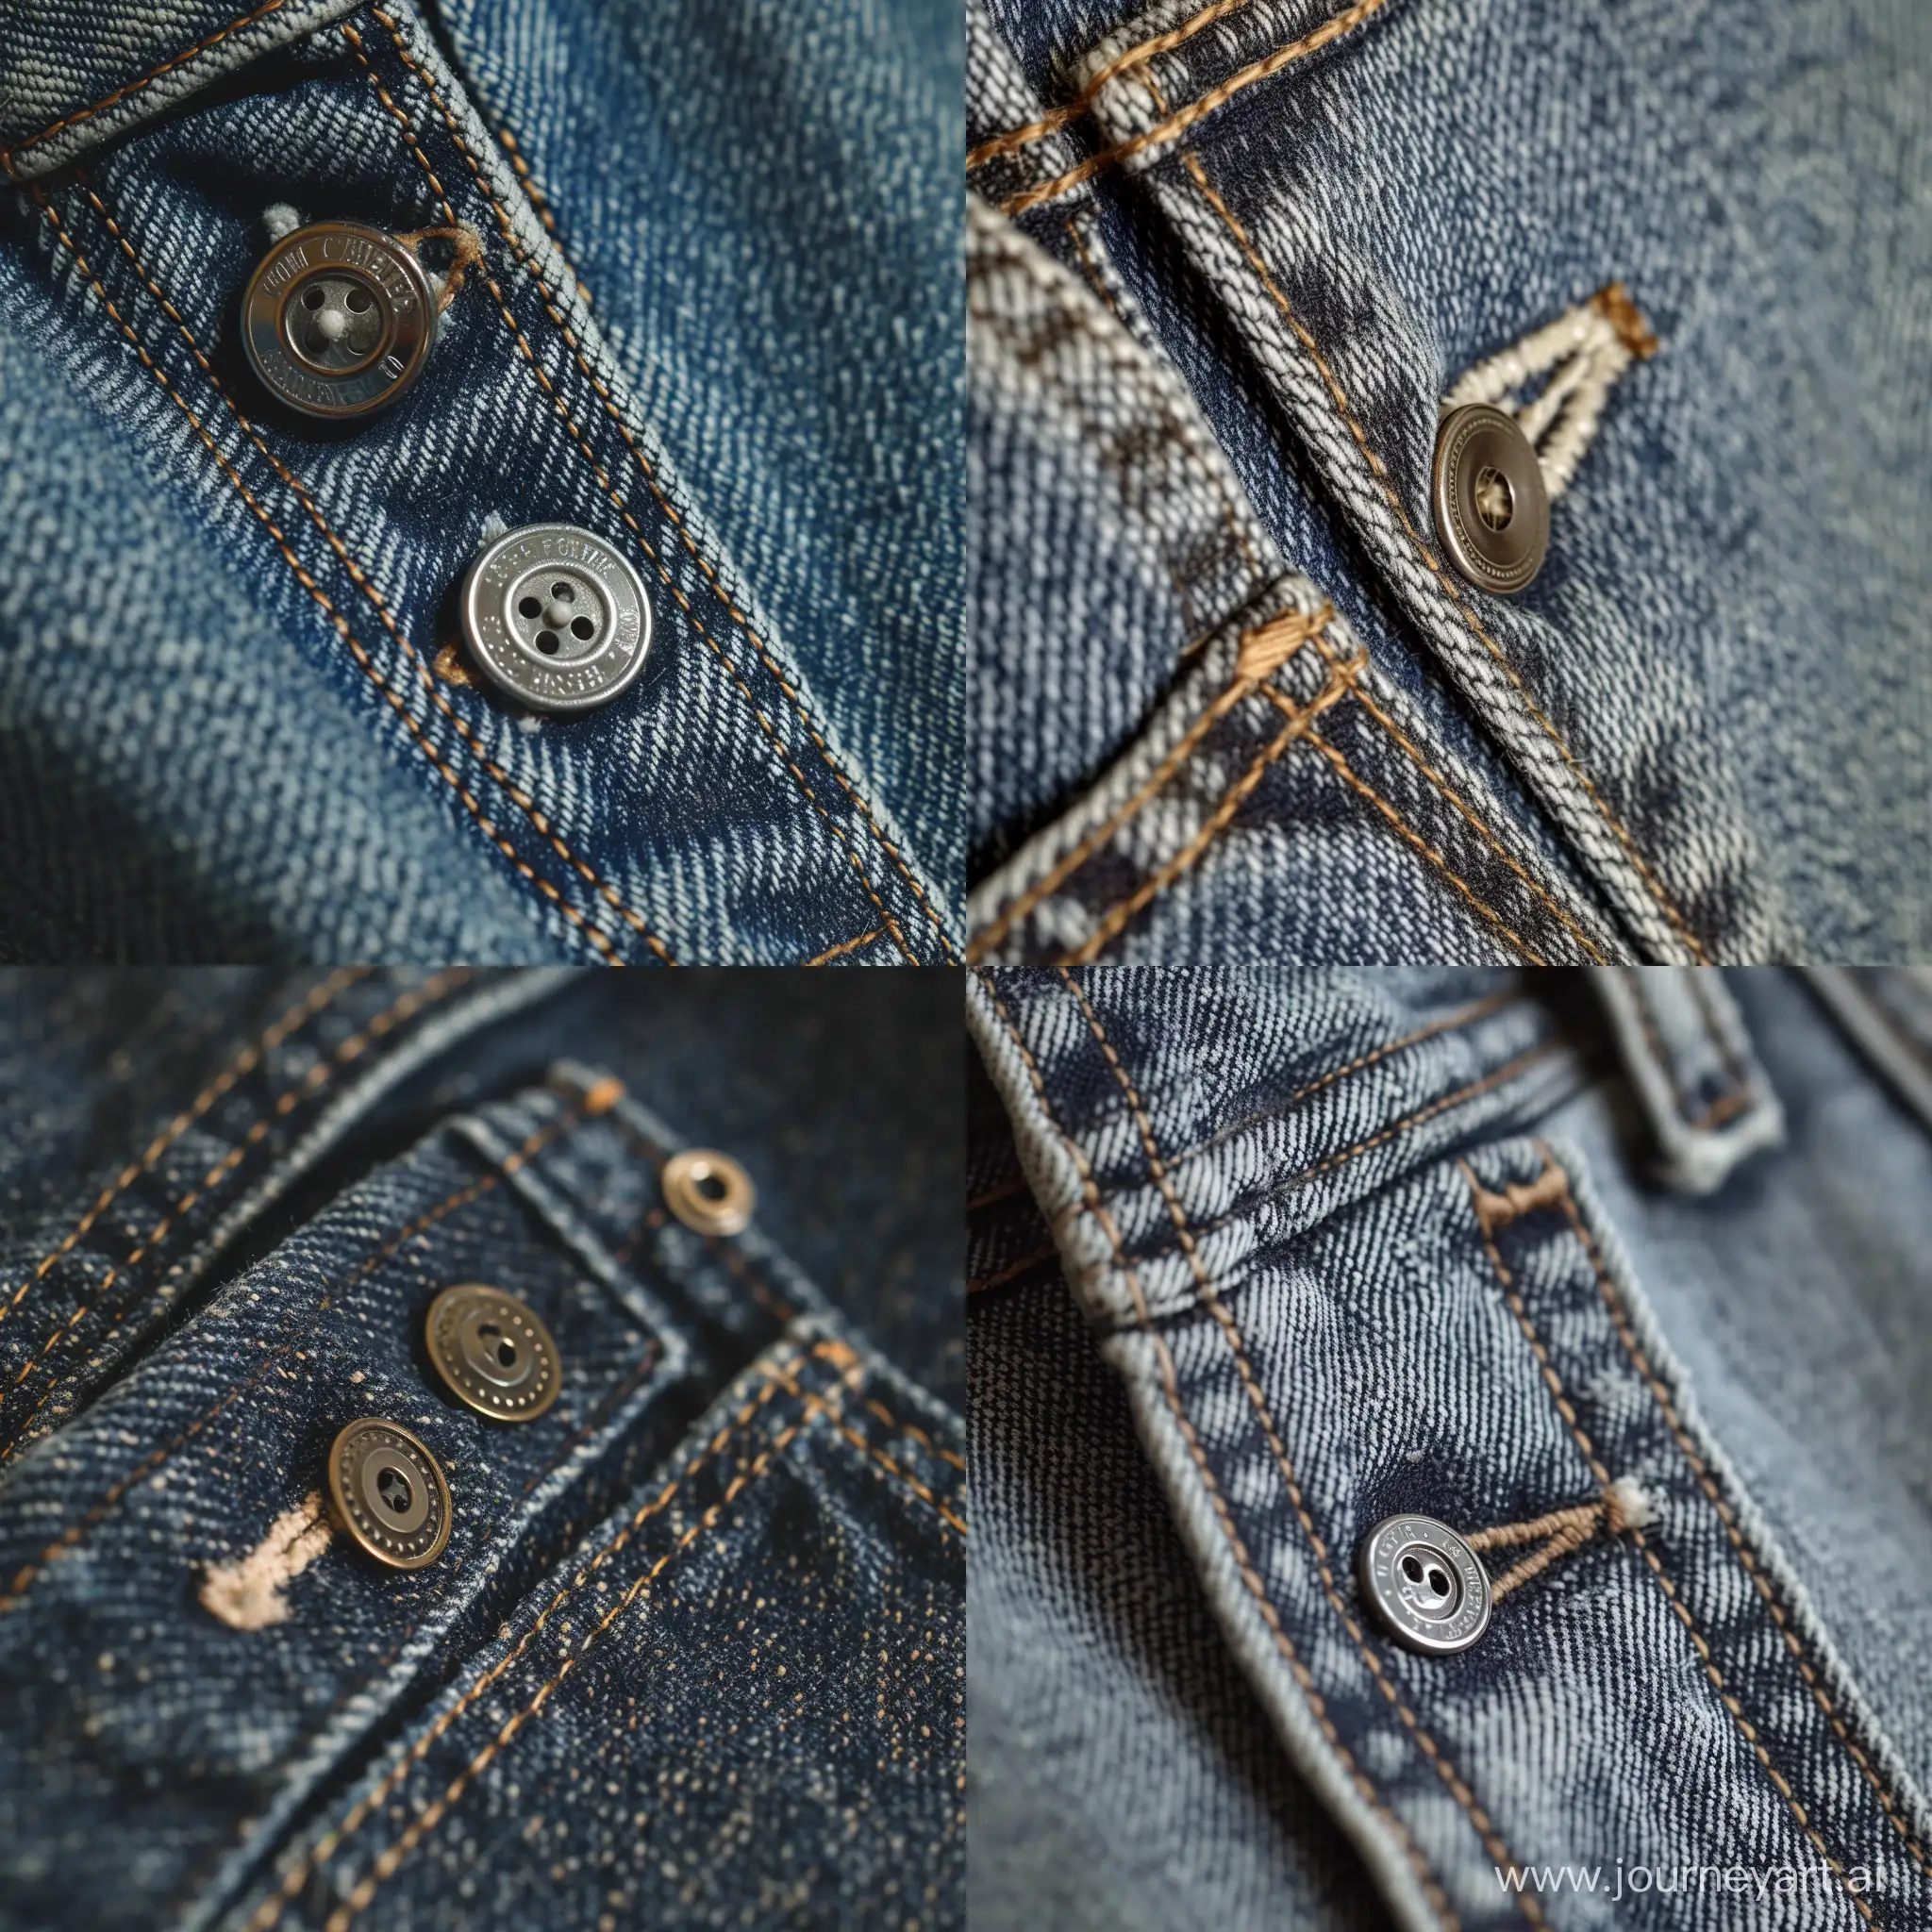 detail on the button fastening of the jeans